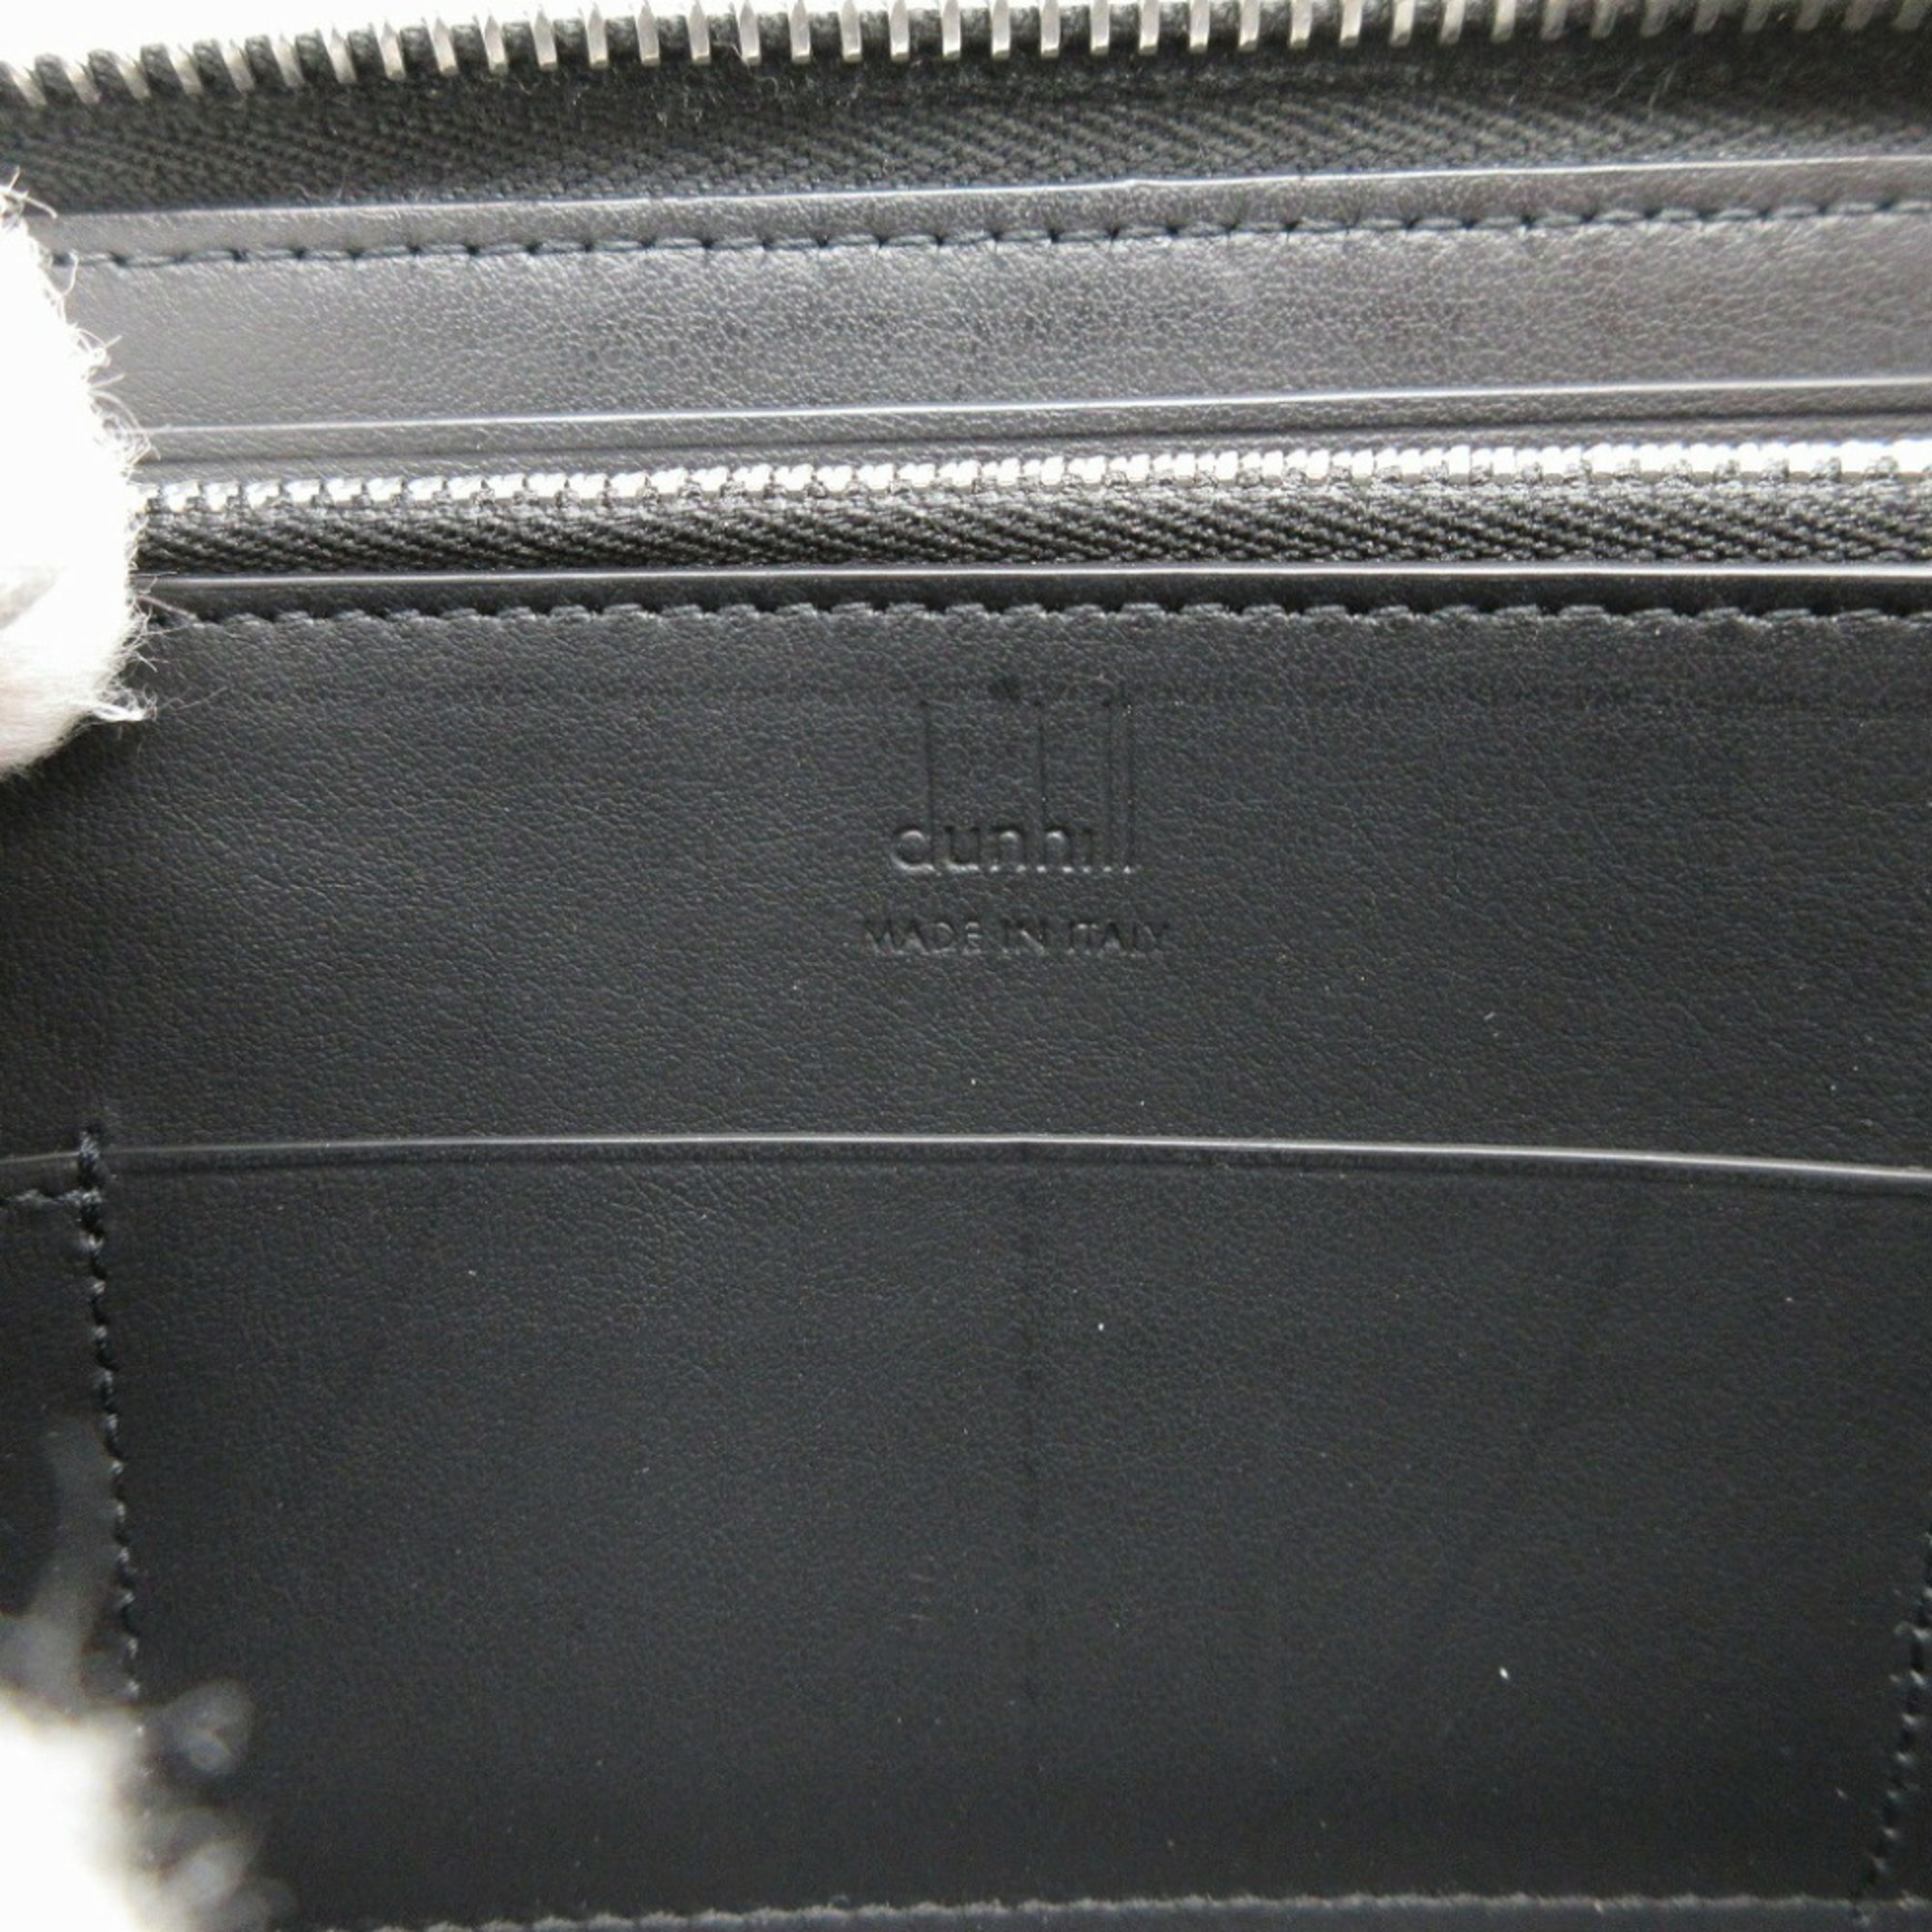 Dunhill Legacy Leather Black Round Long Wallet 0079dunhill 6B0079IIE5